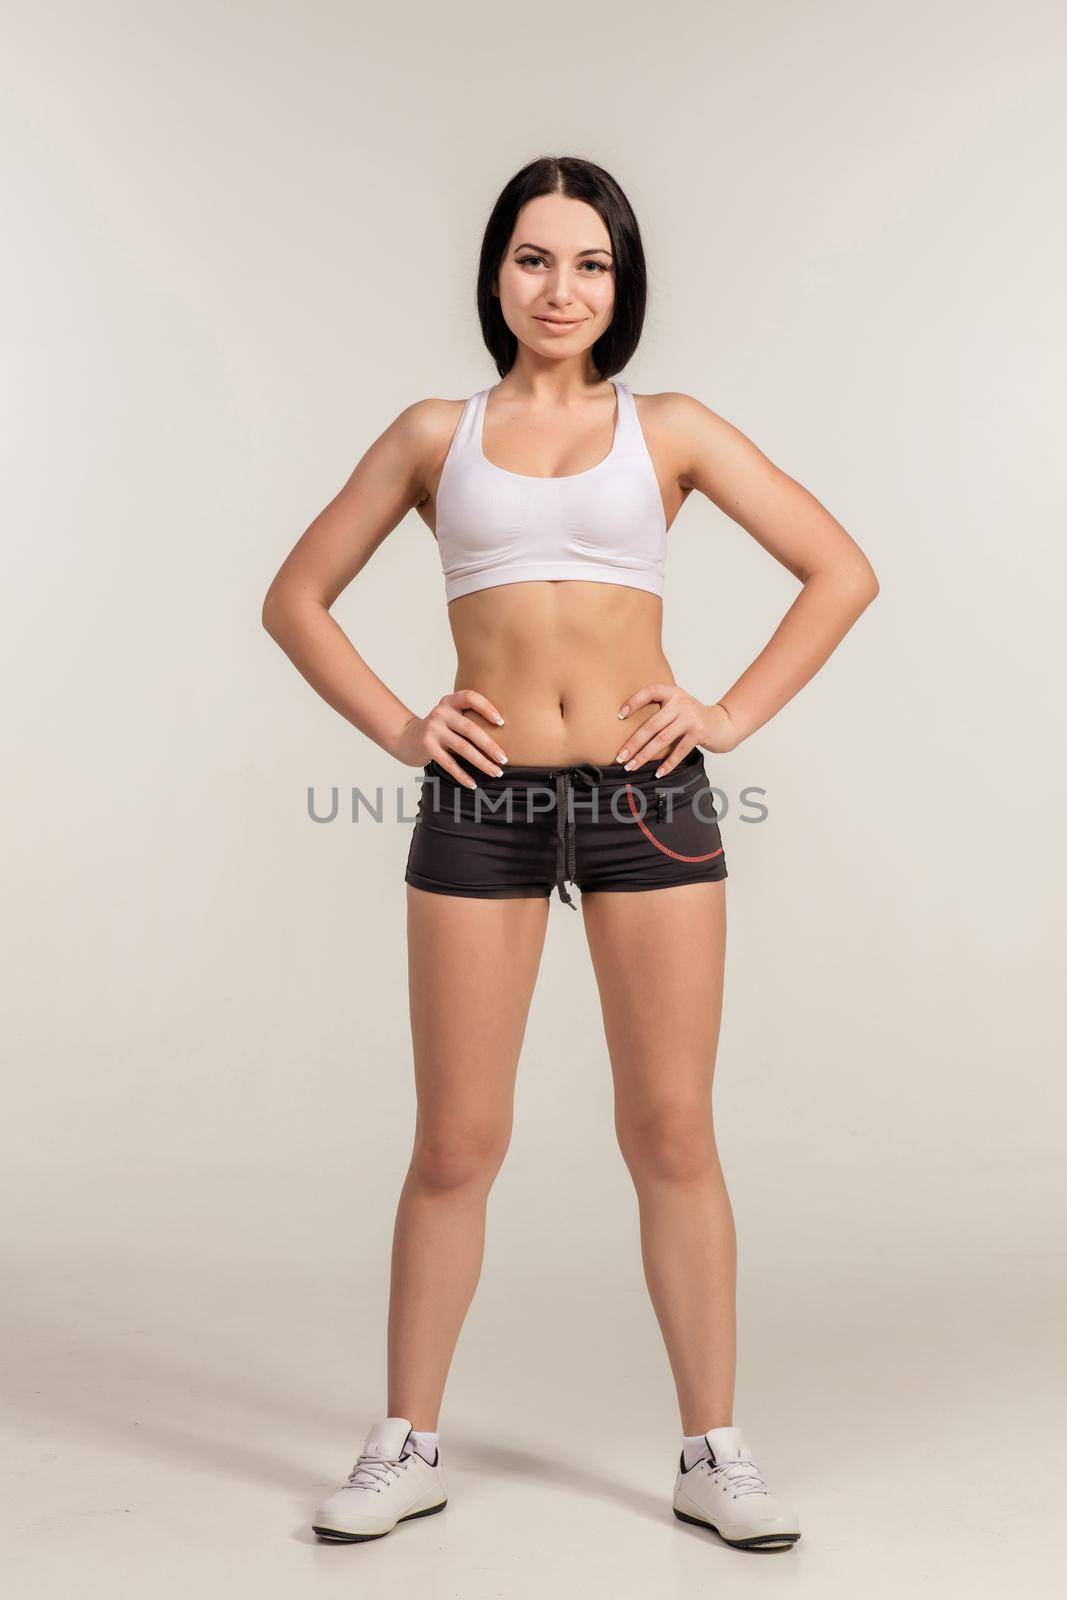 Sports young woman in shorts and top. studio shot. look at the camera